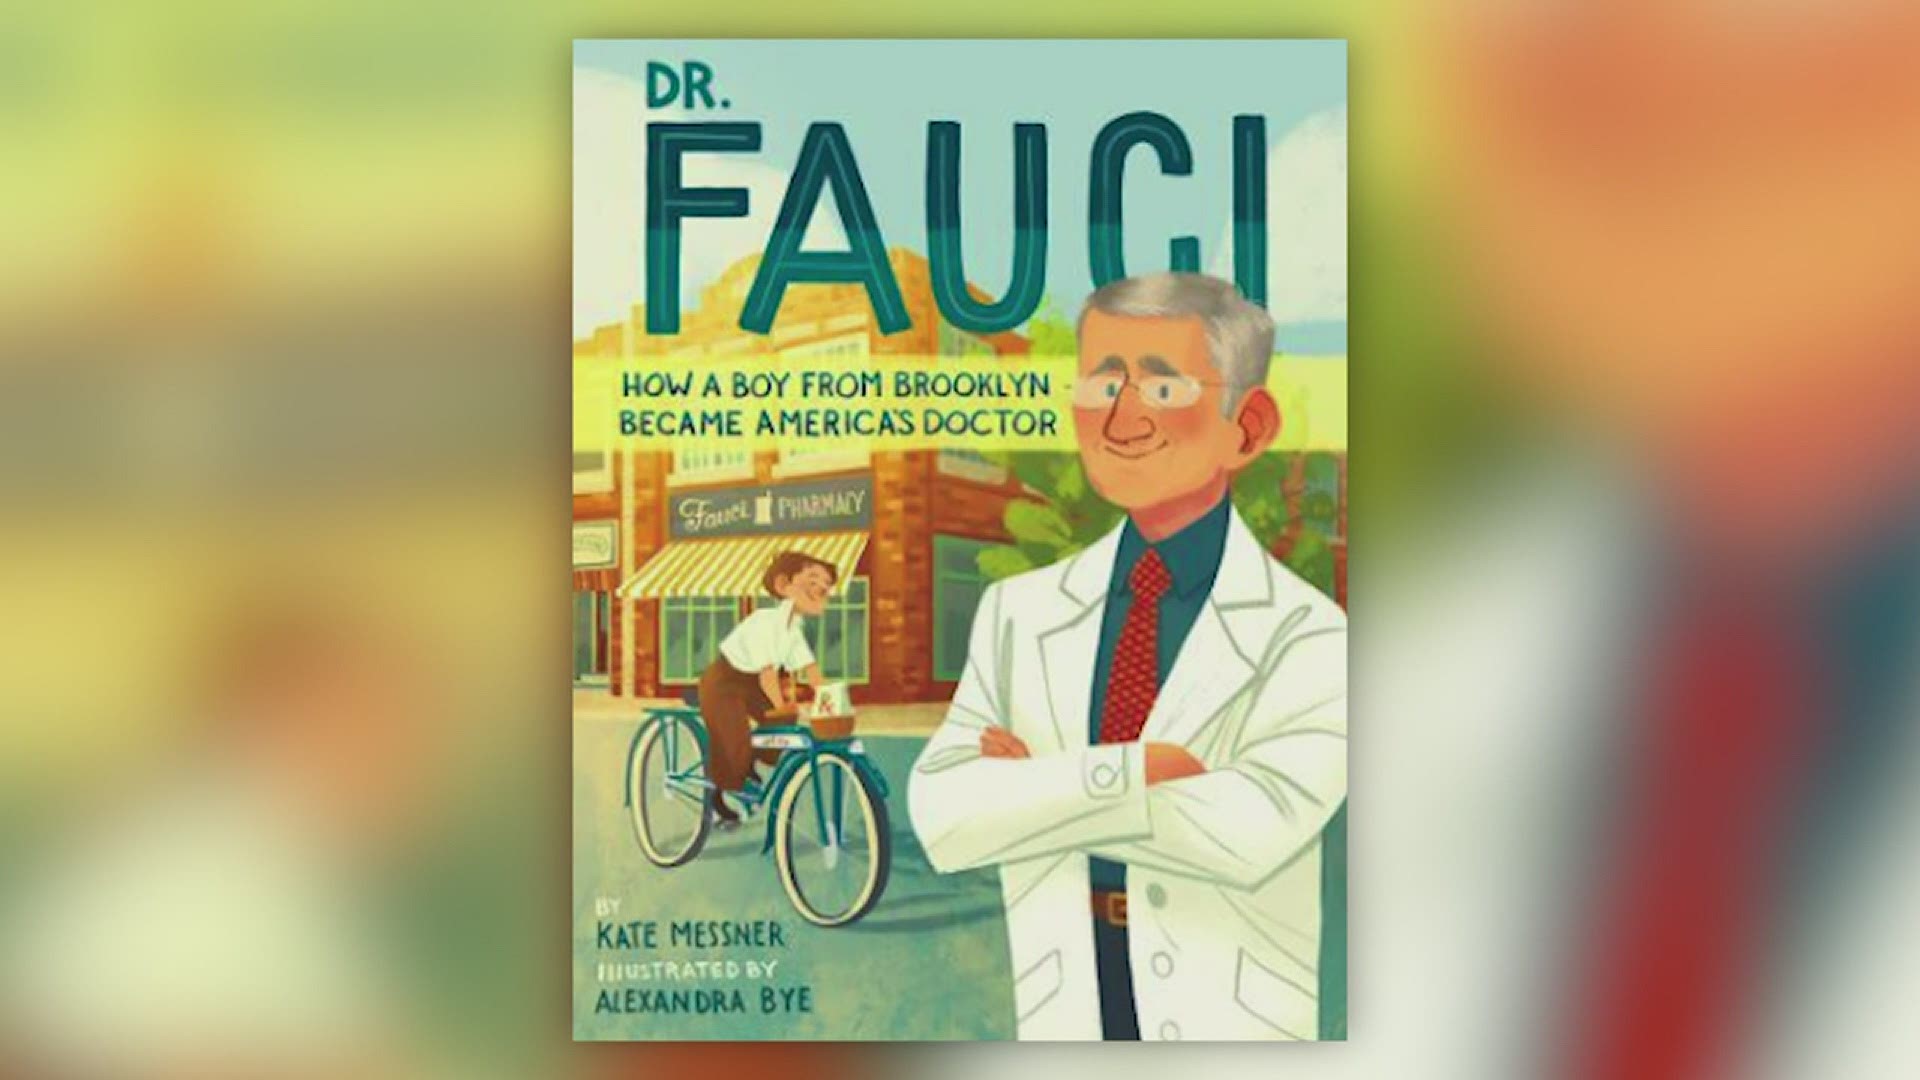 Dr. Fauci, guided the national response to Covid-19, will soon be immortalized in a children's book.